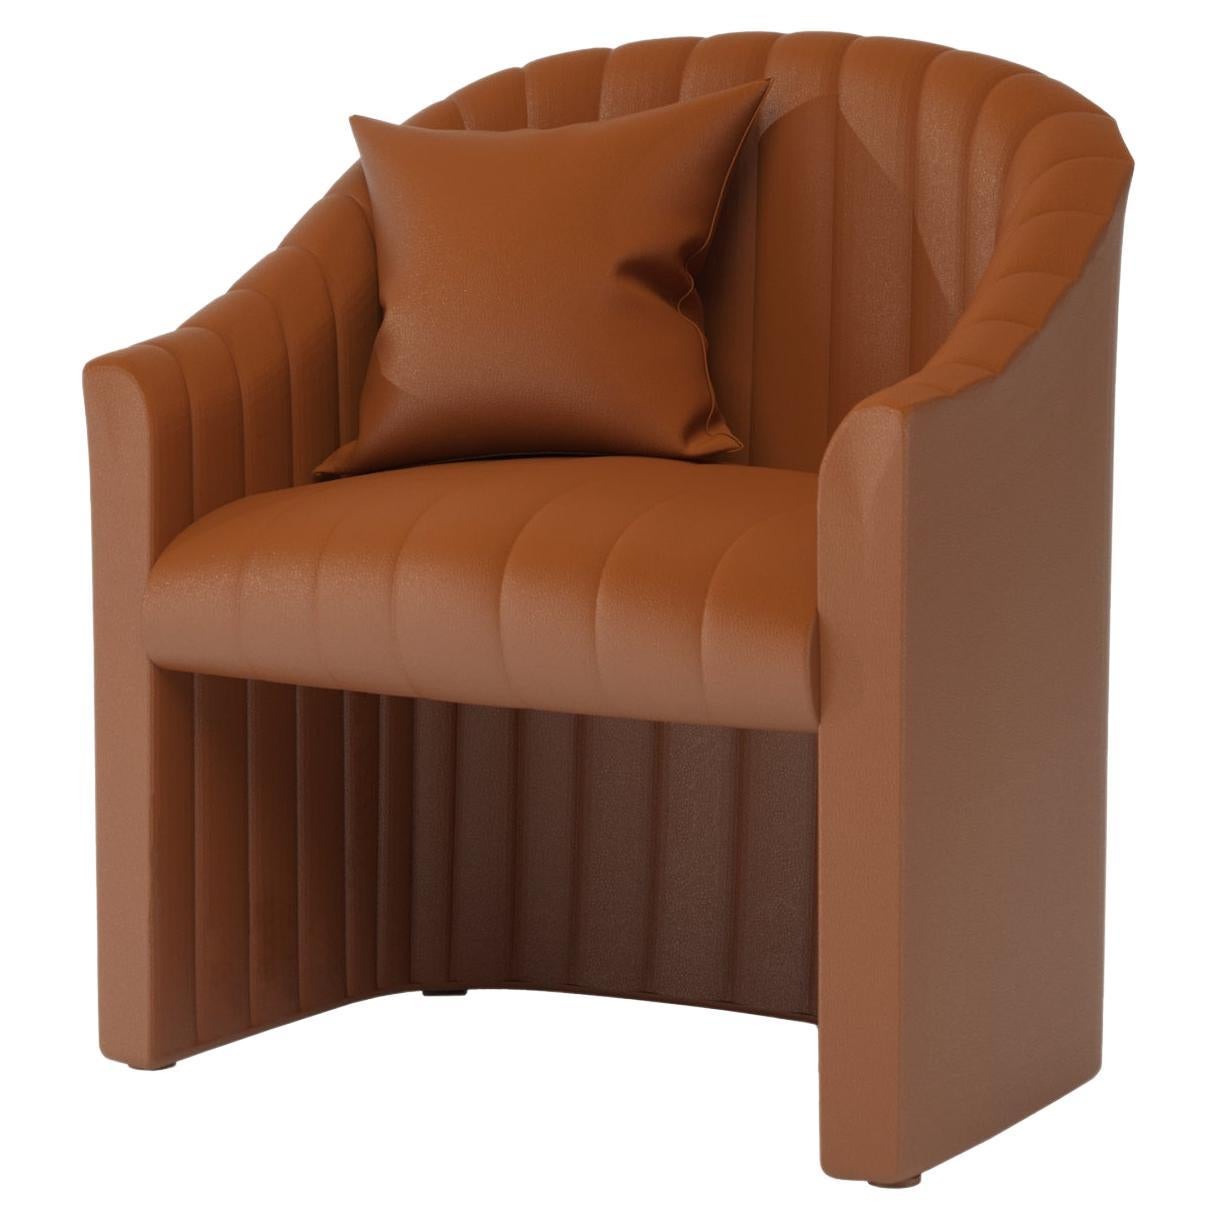 Brown Leather Modern Uphostery Dining Chair Full Back For Sale